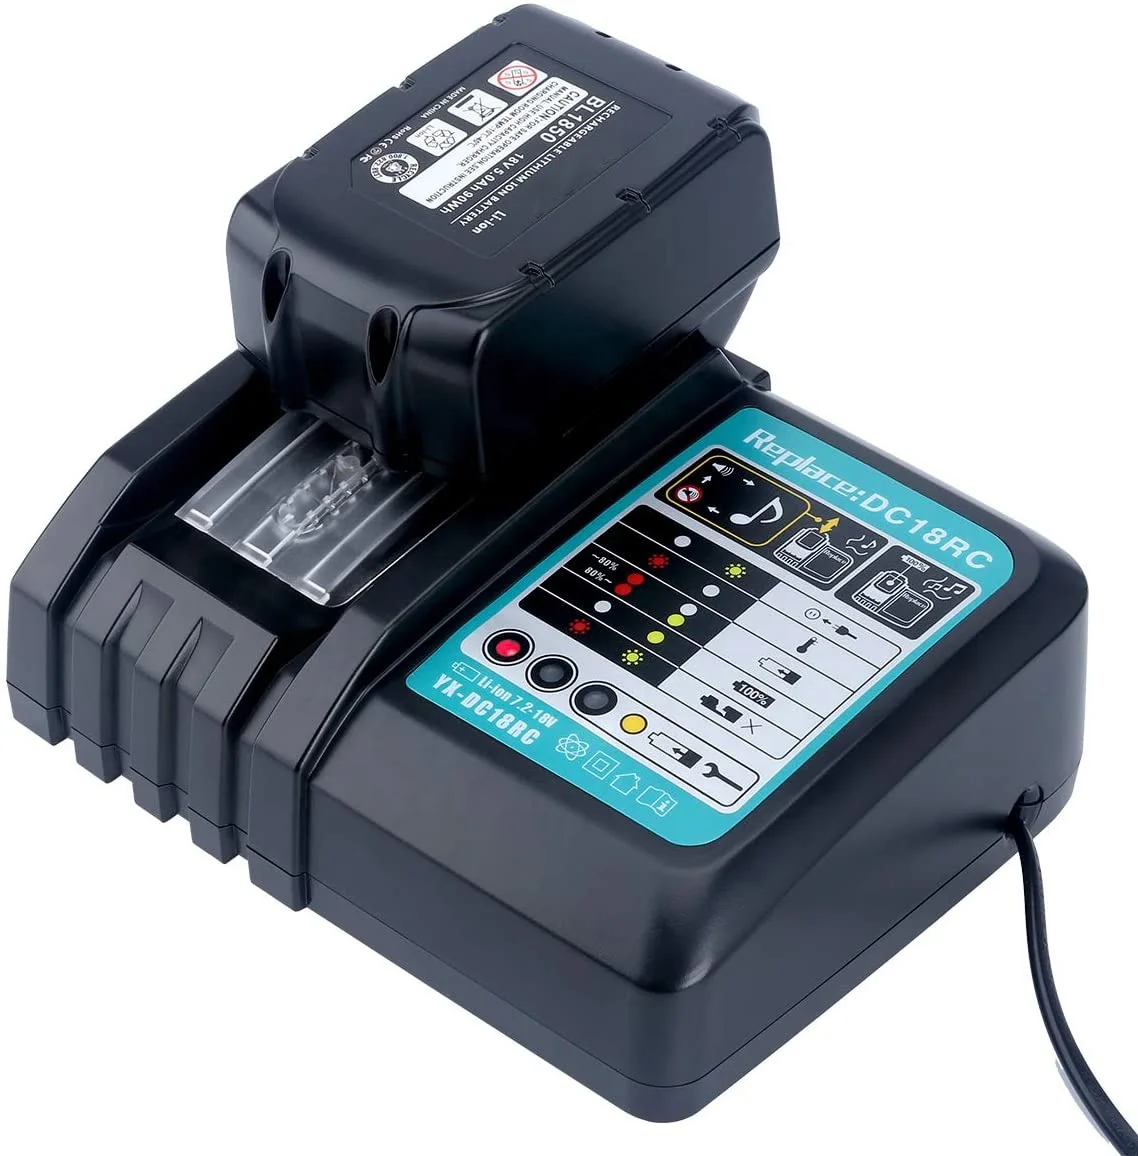 

Power tool battery charger For makitas DC18RC BL1830 BL1830 charger 14.4V to 18V charger, Black